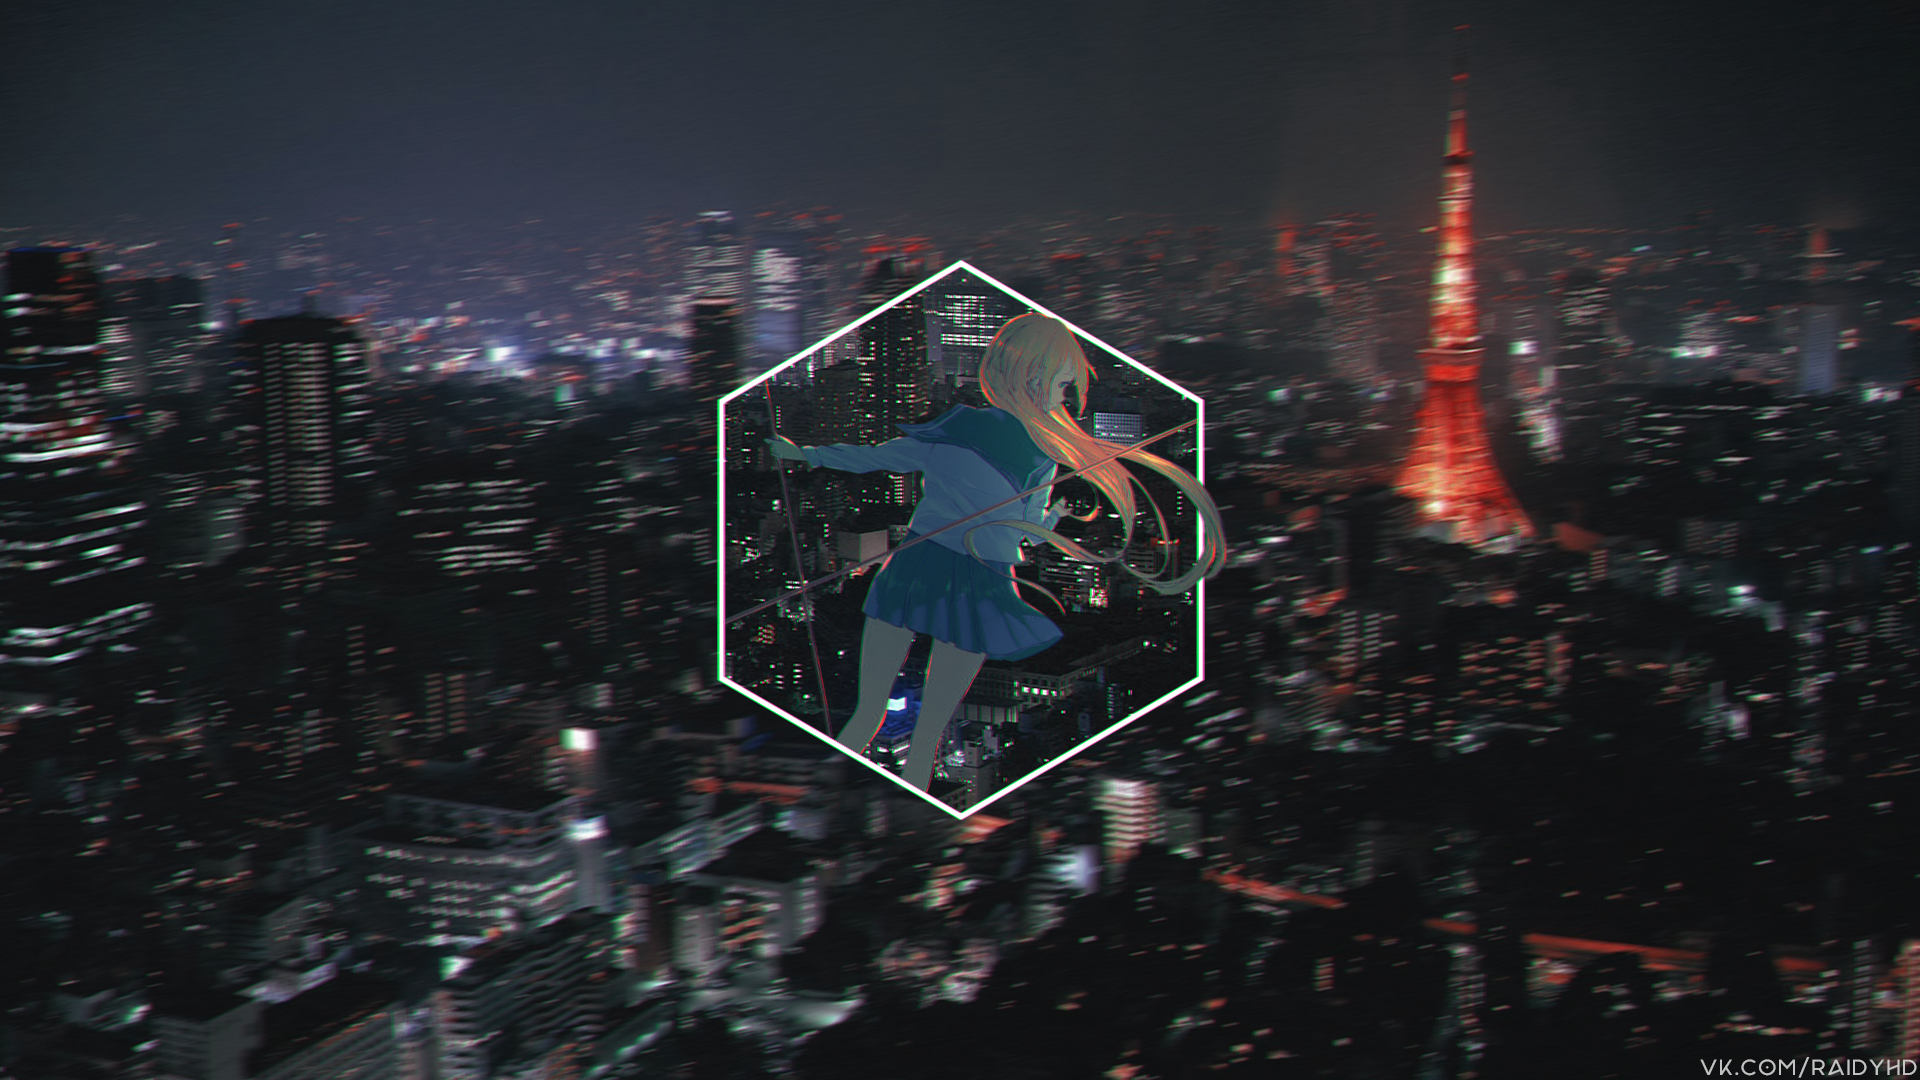 Wallpaper / Anime, Anime Girls, Picture In Picture, Night, City, Tokyo